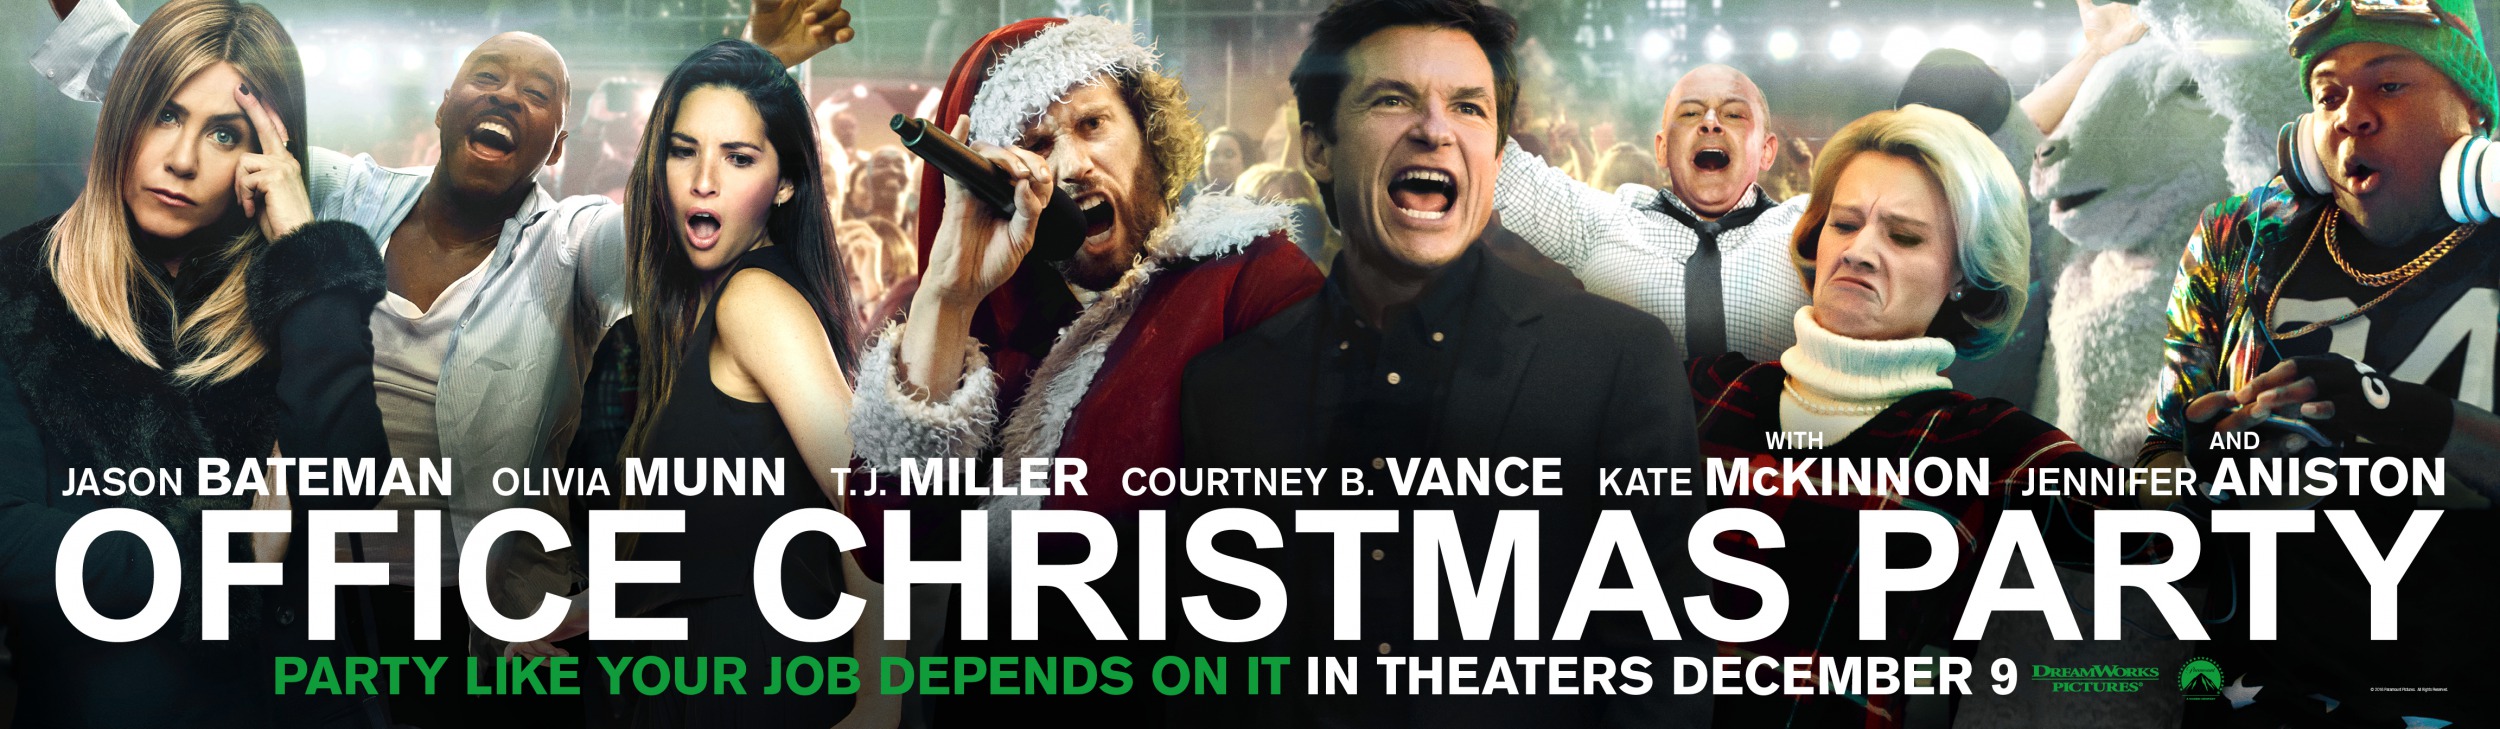 Mega Sized Movie Poster Image for Office Christmas Party (#21 of 22)